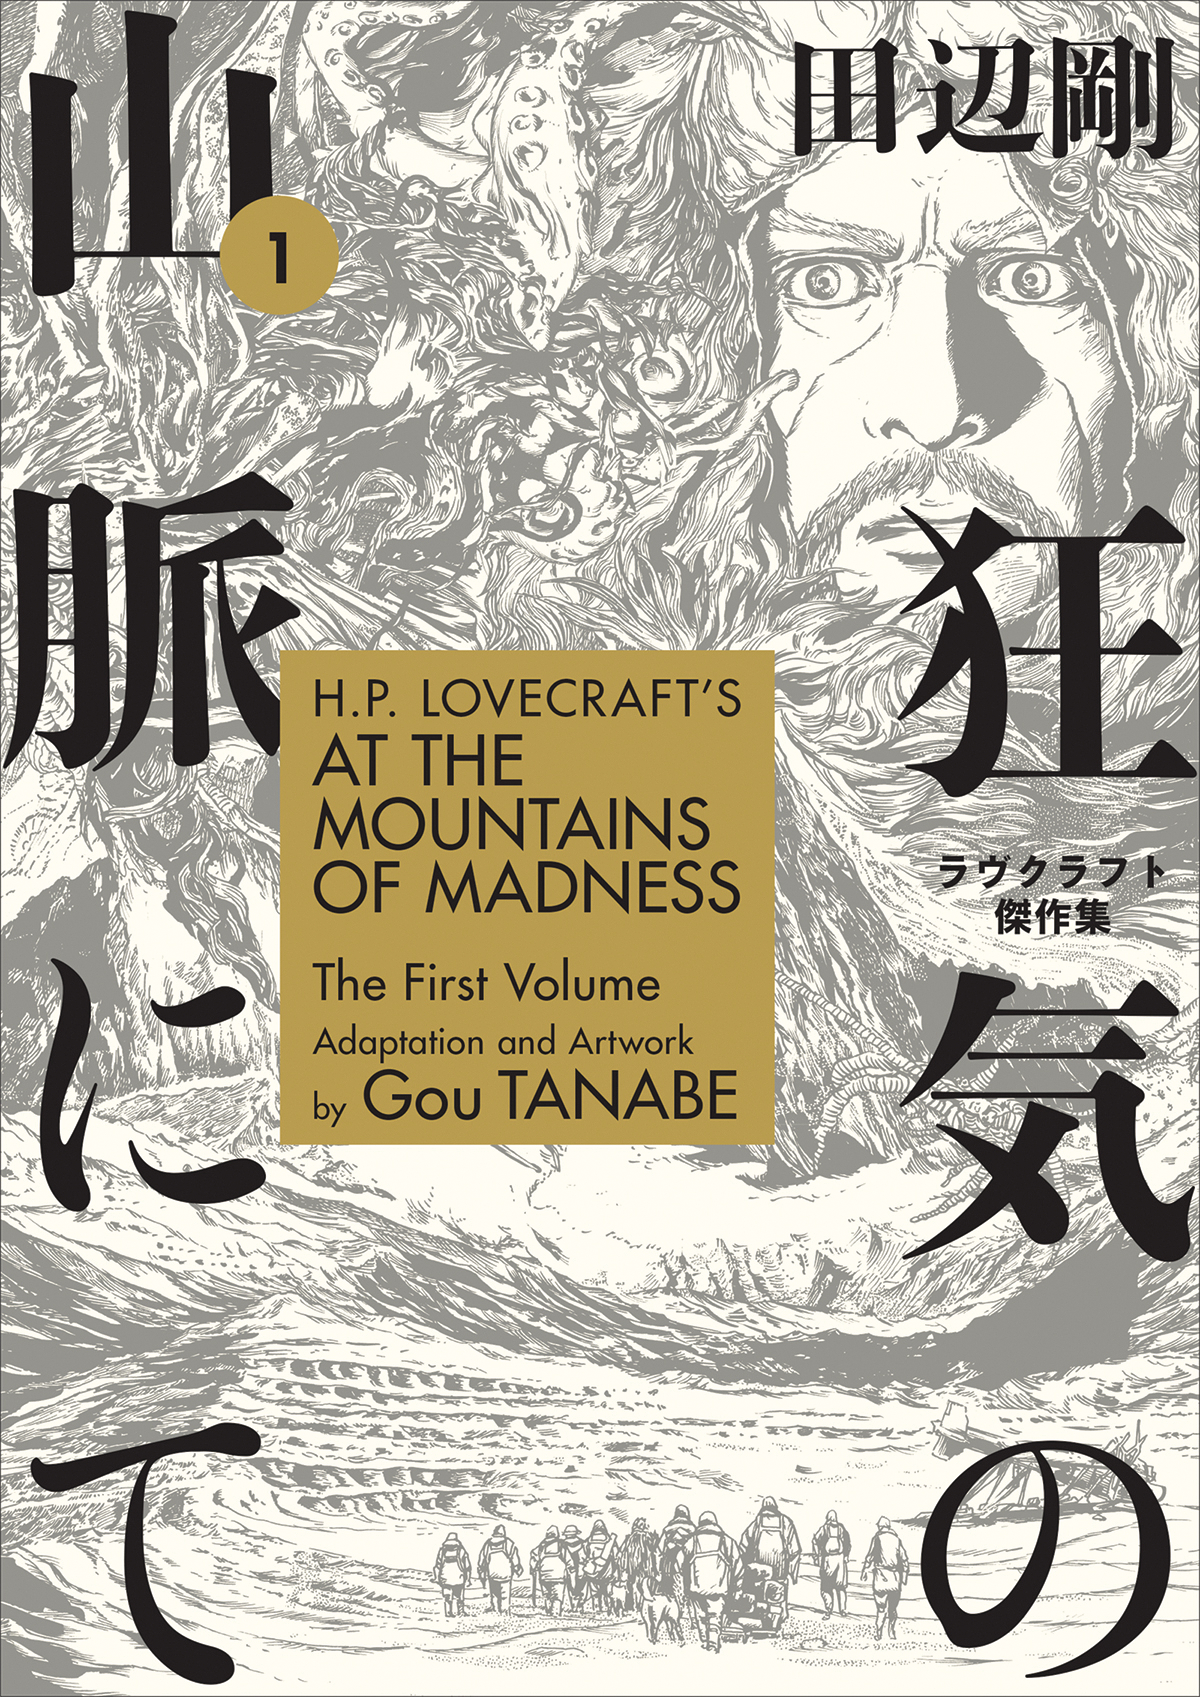 H. P. Lovecraft by Gou Tanabe Manga Volume 1 At Mountains of Madness Volume 1